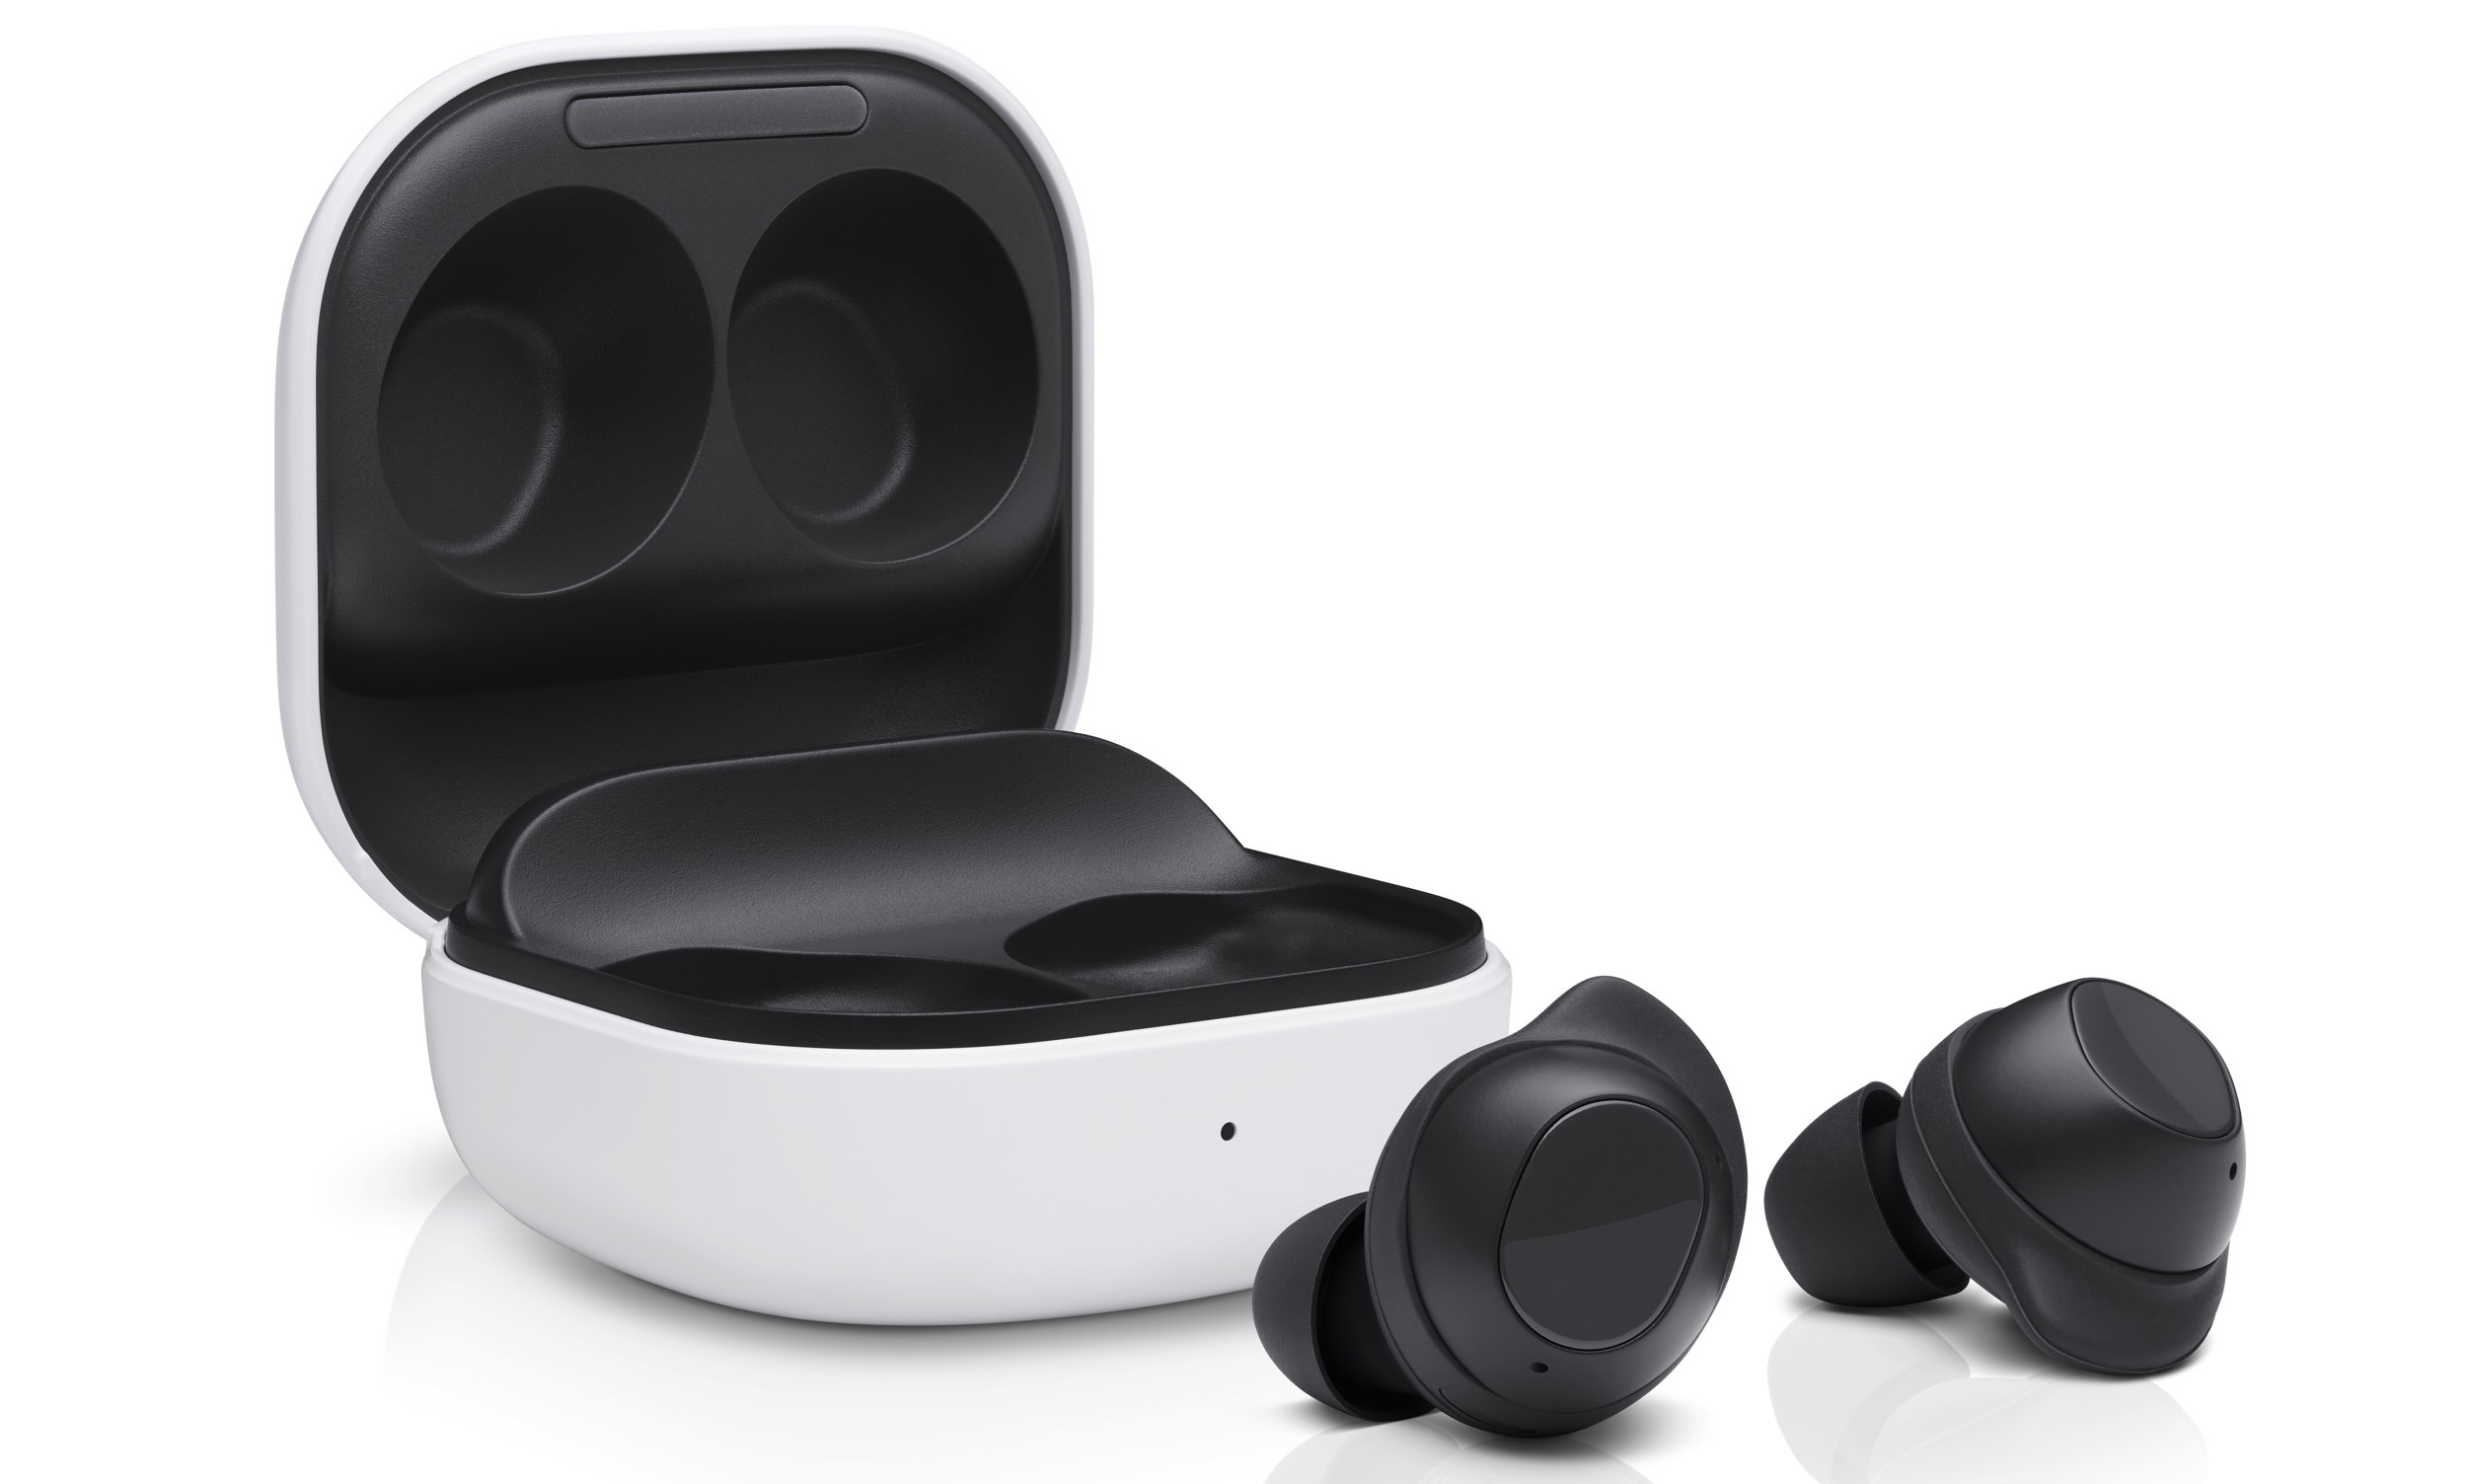 Samsung Galaxy Buds 2 review: More affordable noise cancelling earbuds